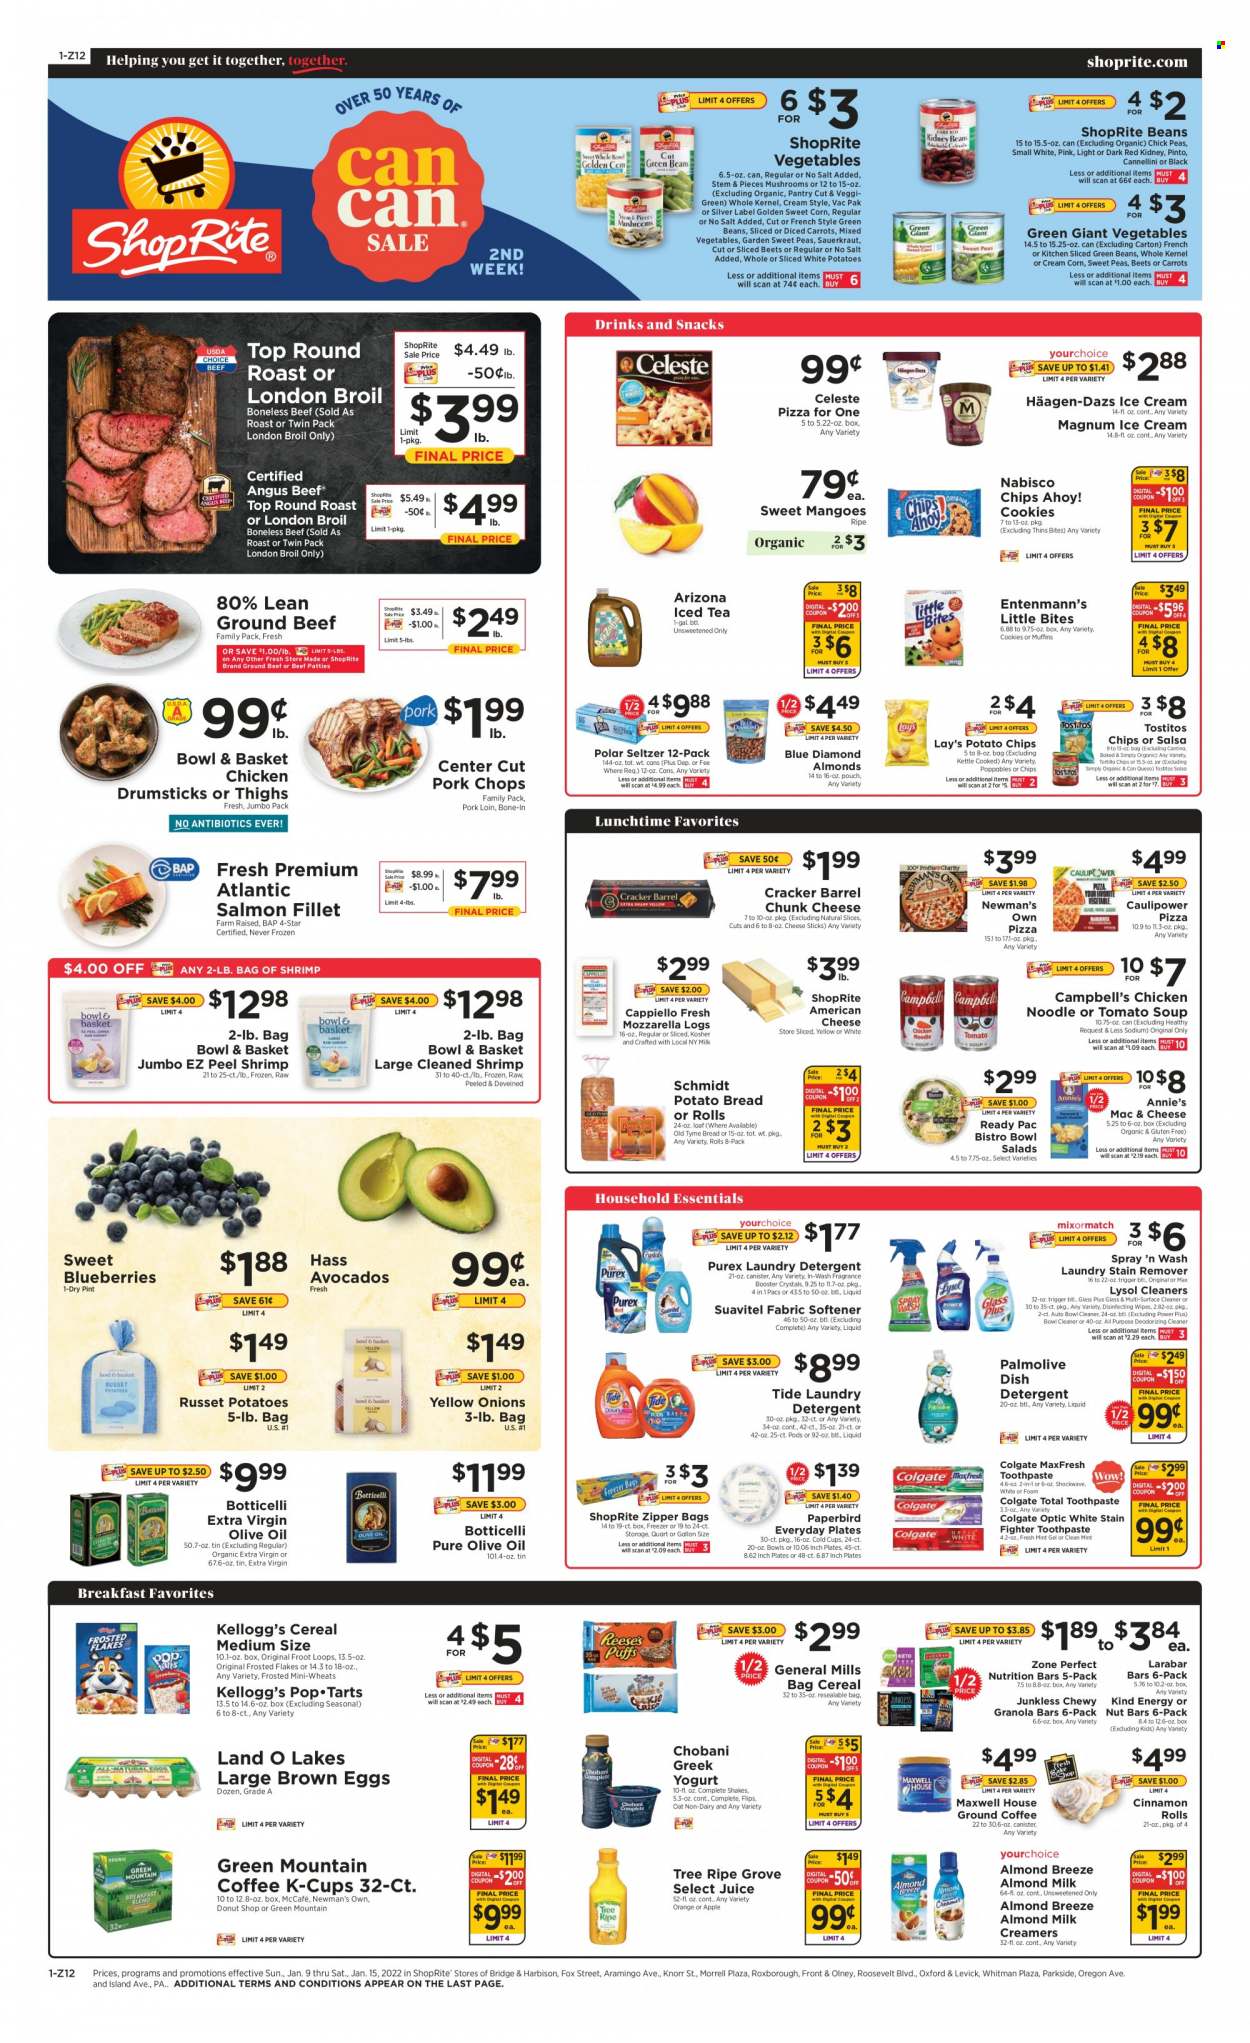 ShopRite Flyer - 01/09/2022 - 01/15/2022 - Sales products - bread, Bowl & Basket, cinnamon rolls, Entenmann's, corn, green beans, russet potatoes, sweet corn, avocado, blueberries, orange, salmon, salmon fillet, shrimps, Campbell's, tomato soup, pizza, soup, Knorr, noodles, Annie's, Ready Pac, american cheese, chunk cheese, greek yoghurt, yoghurt, Chobani, Almond Breeze, shakes, eggs, almond creamer, ice cream, Häagen-Dazs, mixed vegetables, cheese Sticks, Celeste, cookies, crackers, Kellogg's, Chips Ahoy!, Little Bites, tortilla chips, potato chips, Lay's, Thins, Tostitos, oats, sauerkraut, cereals, nutrition bars, nut bar, granola bar, Frosted Flakes, Zone Perfect, salsa, extra virgin olive oil, olive oil, oil, Blue Diamond, juice, ice tea, AriZona, seltzer water, Maxwell House, coffee capsules, McCafe, K-Cups, Green Mountain, red wine, wine, chicken drumsticks, chicken meat, beef meat, ground beef, round roast, pork chops, pork loin, pork meat, wipes, detergent, surface cleaner, cleaner, stain remover, Lizol, Tide, fabric softener, laundry detergent, Purex, Palmolive, Colgate, toothpaste, fragrance, plate, essentials. Page 1.